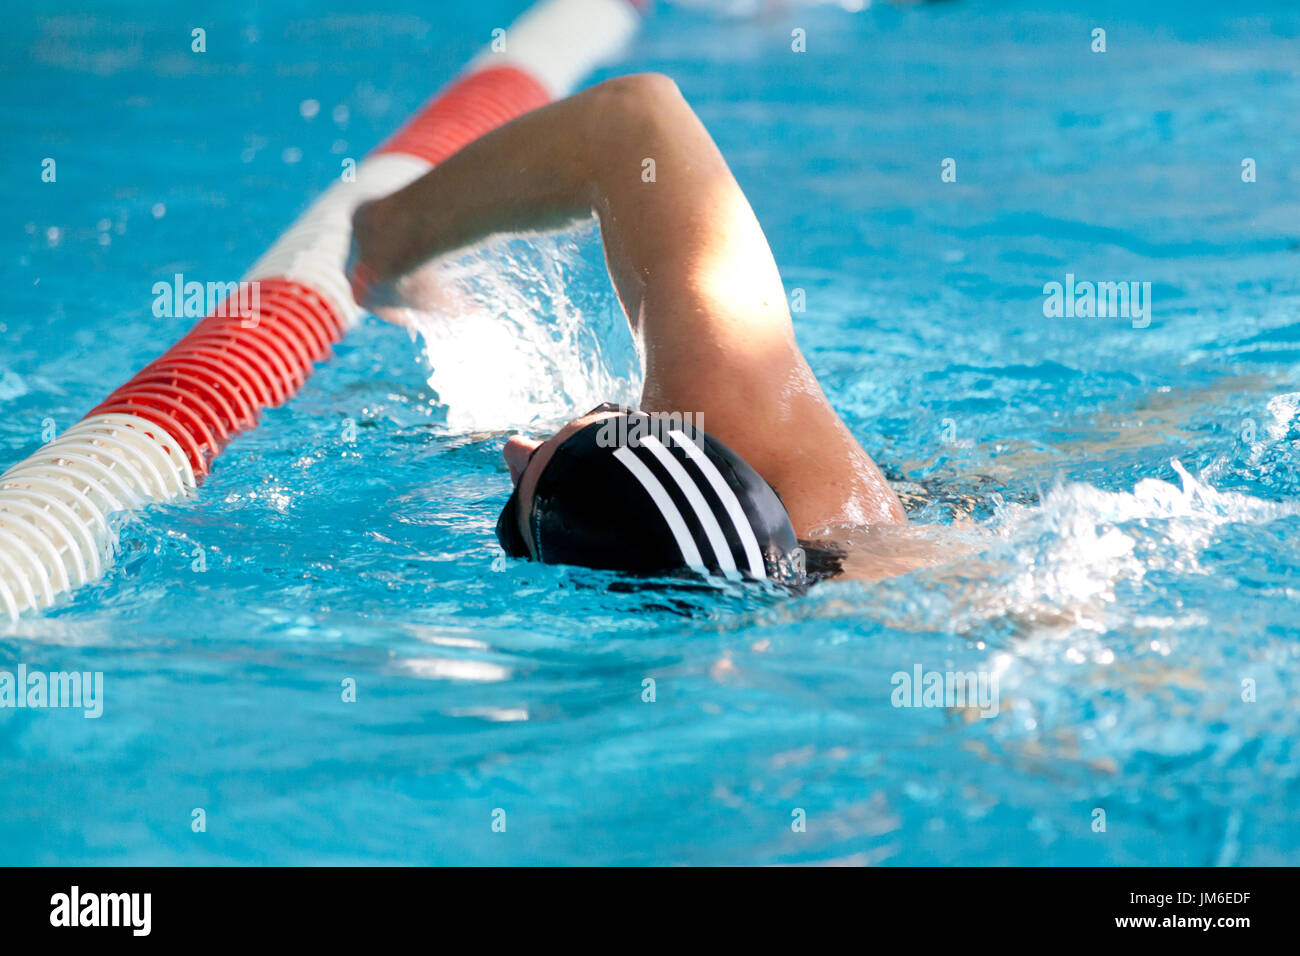 Swimming Man with black and white swimming cap close to floats Stock Photo